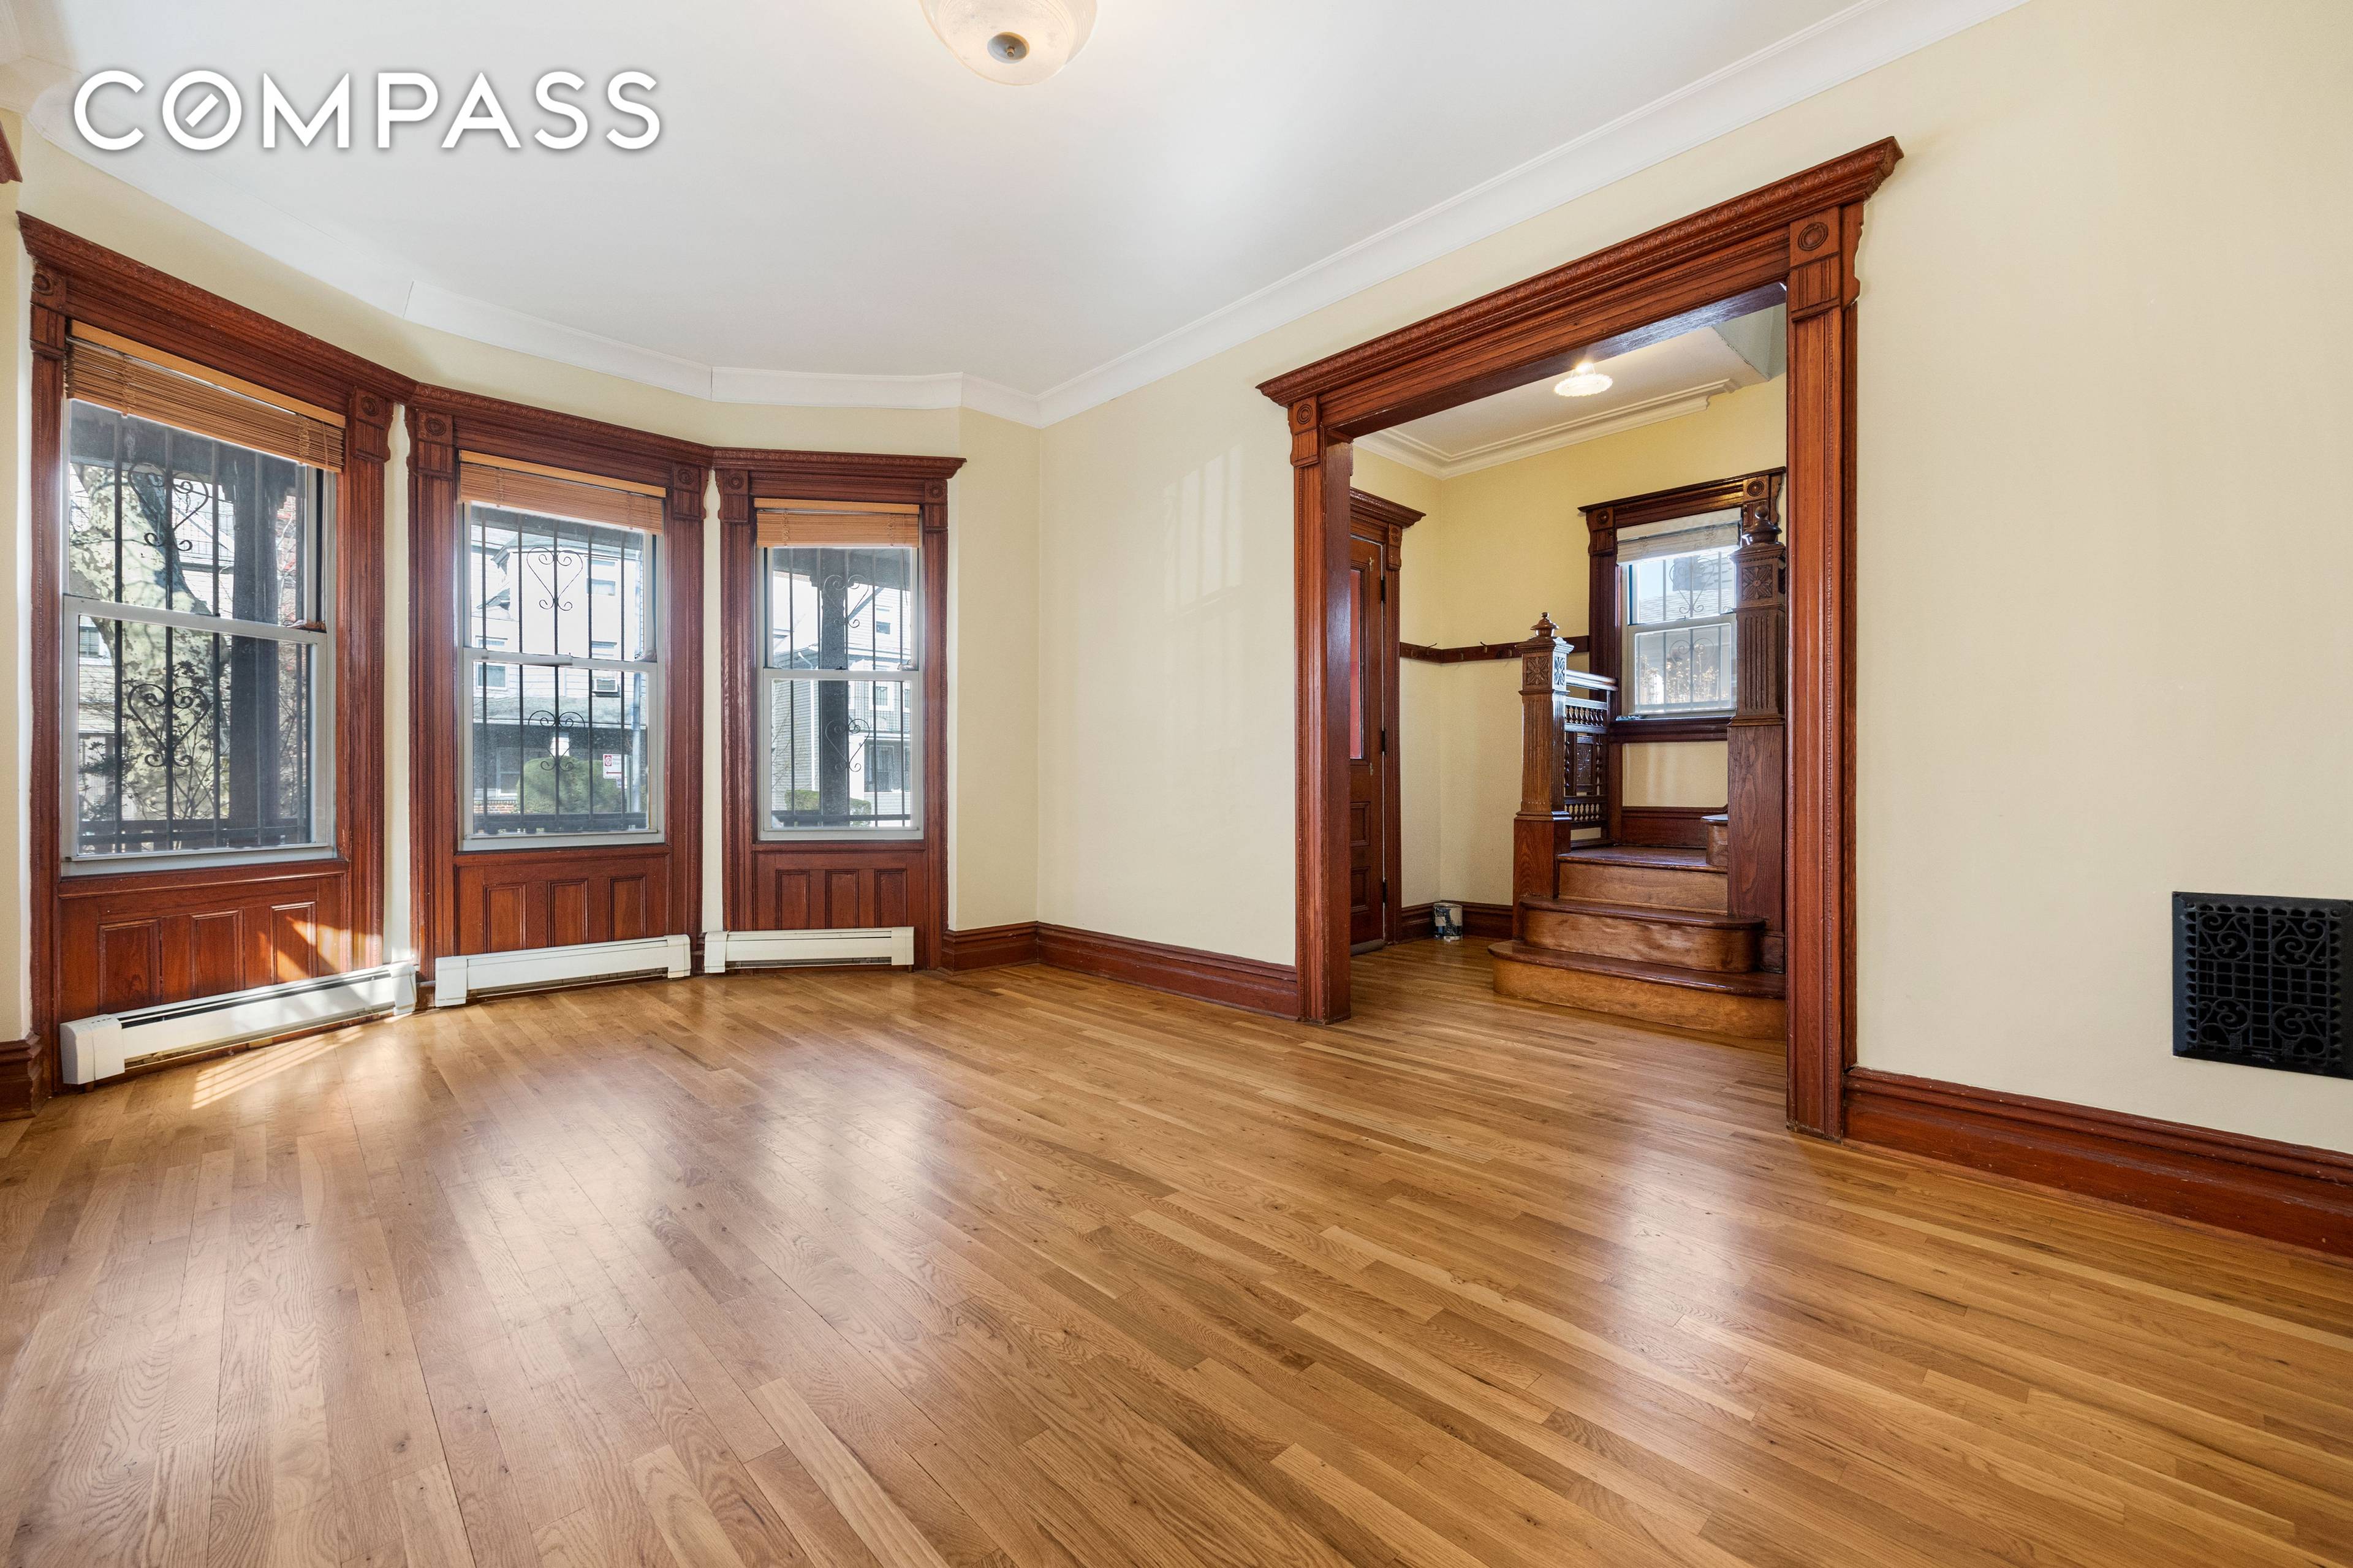 Delightful five bedroom home located in Kensington next to the border with Ditmas Park, steps away from Cortelyou Road's vibrant restaurants, bars and shopping.